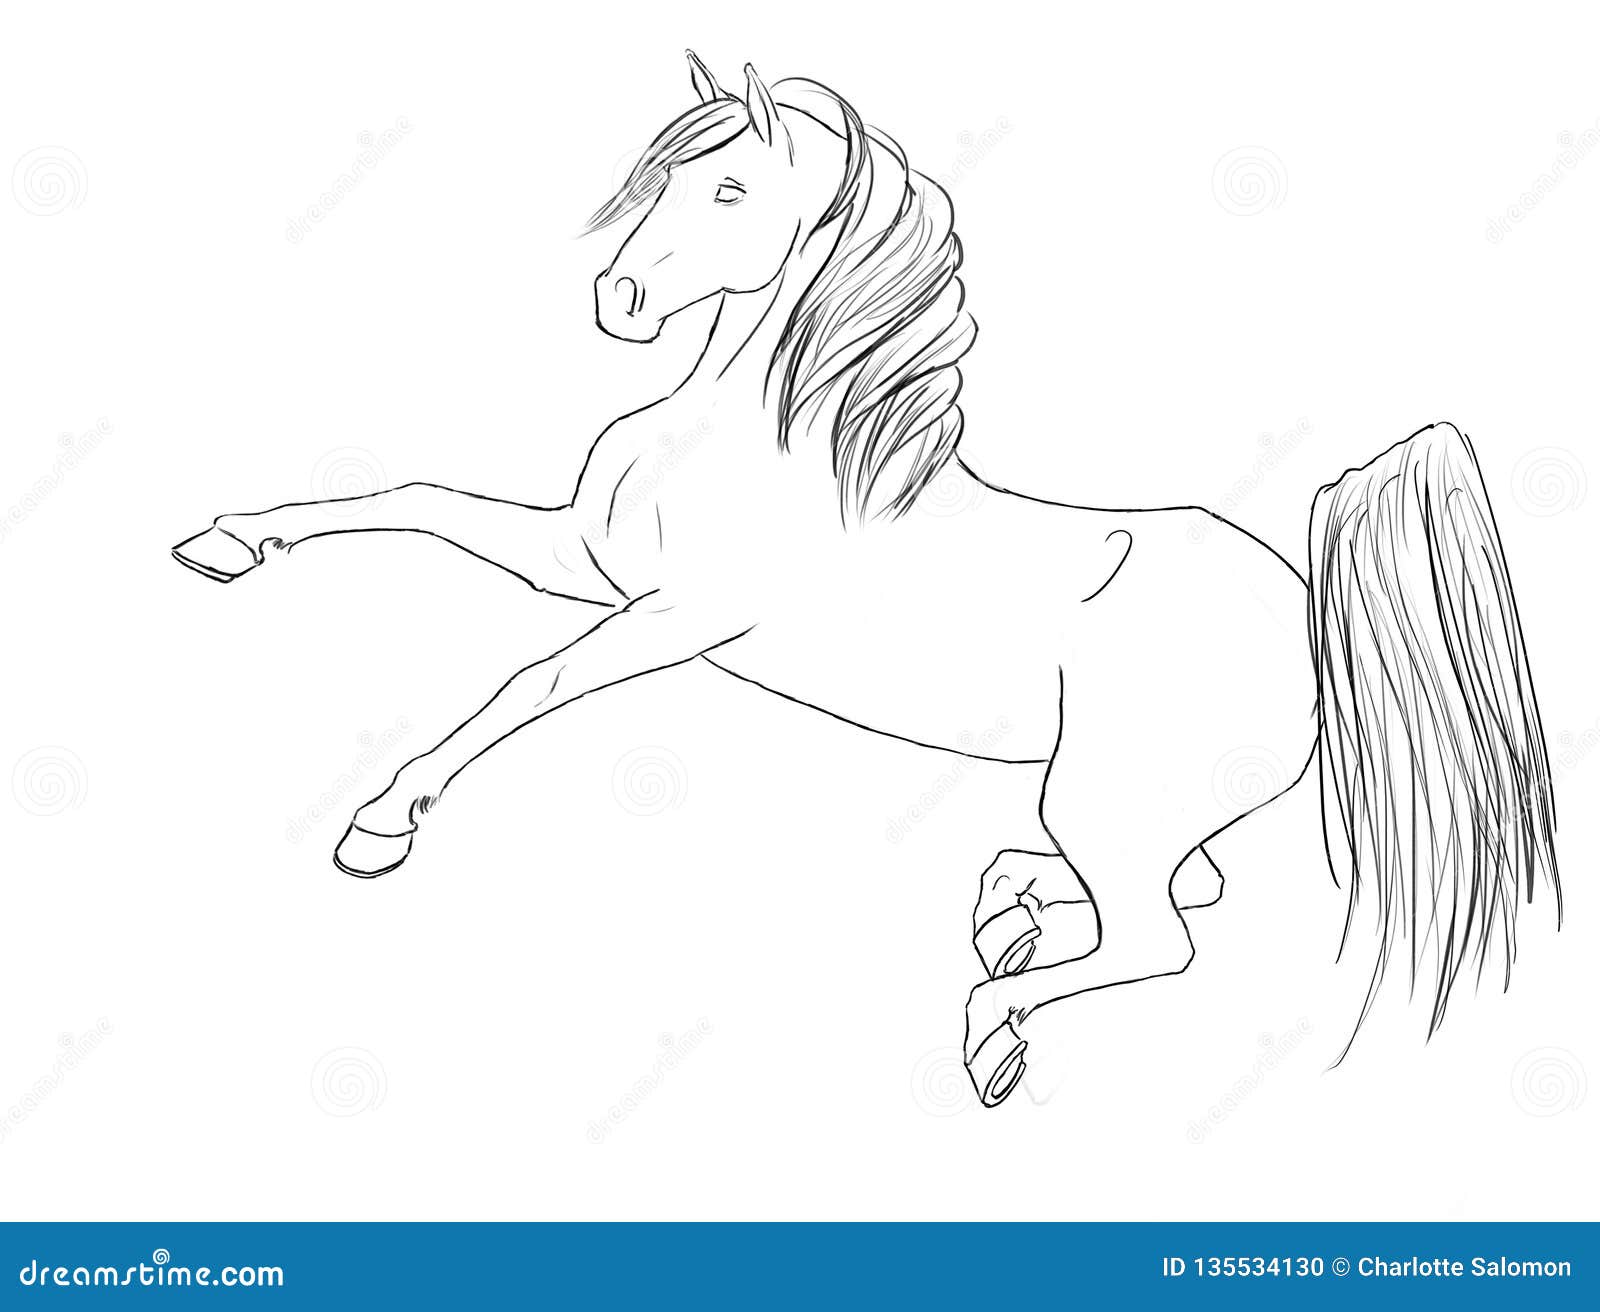 Jumping Horse Lineart by Wyakyn on DeviantArt